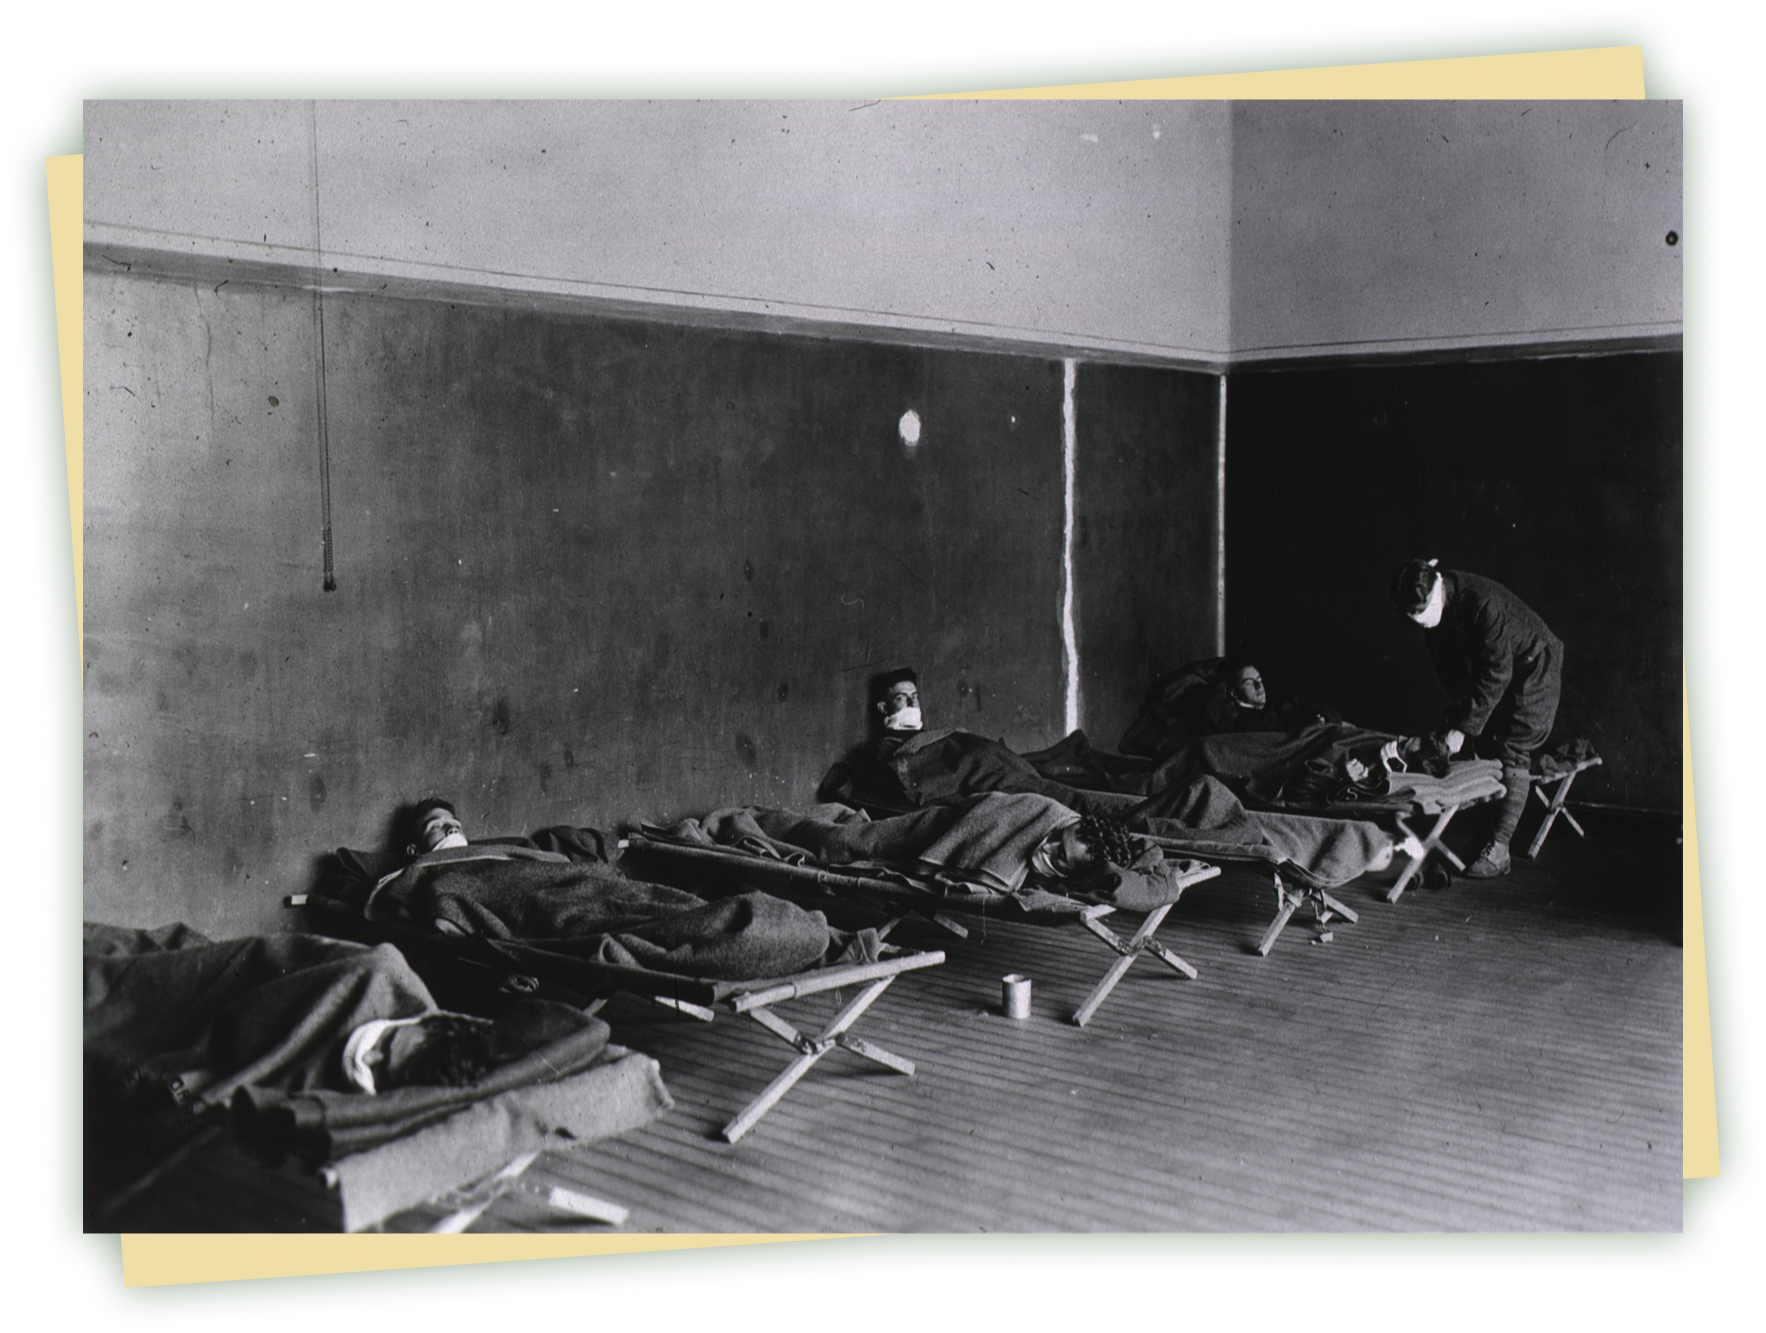 A black and white photograph of men lying on cots